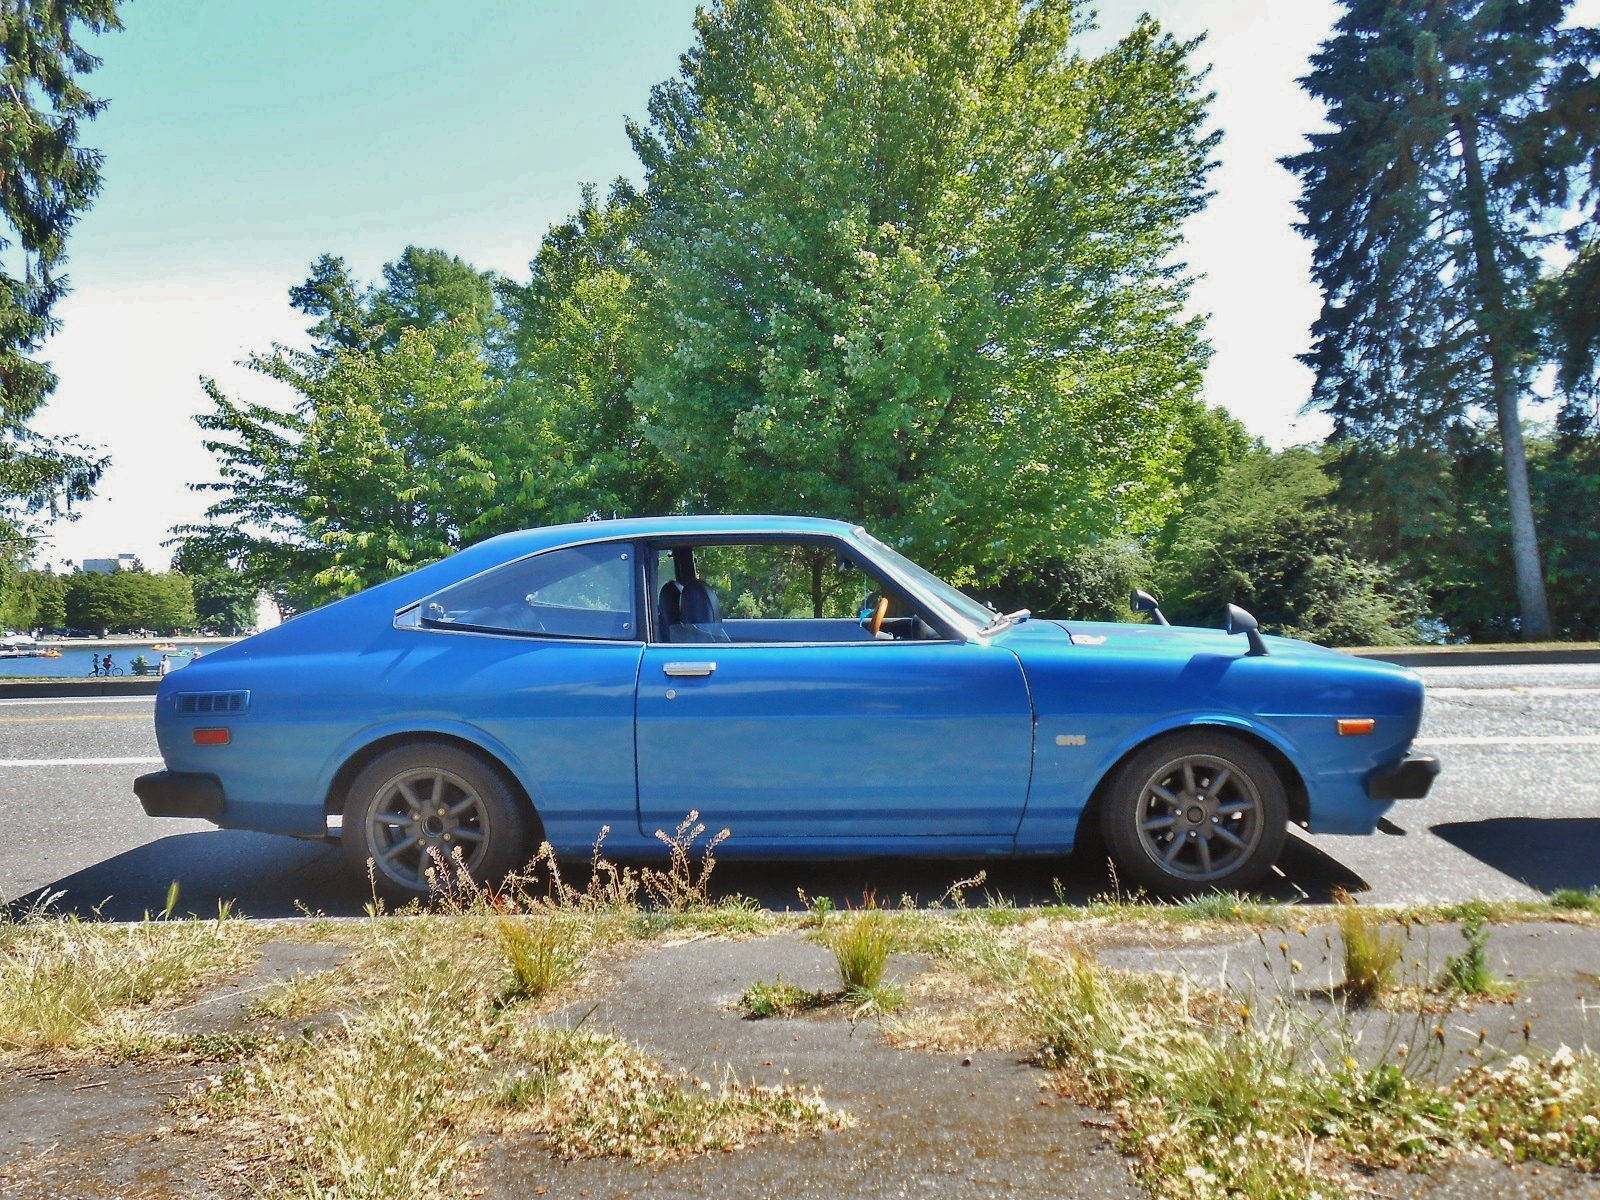 Seattle's Parked Cars: 1977 Toyota Corolla SR5 Sport Coupe